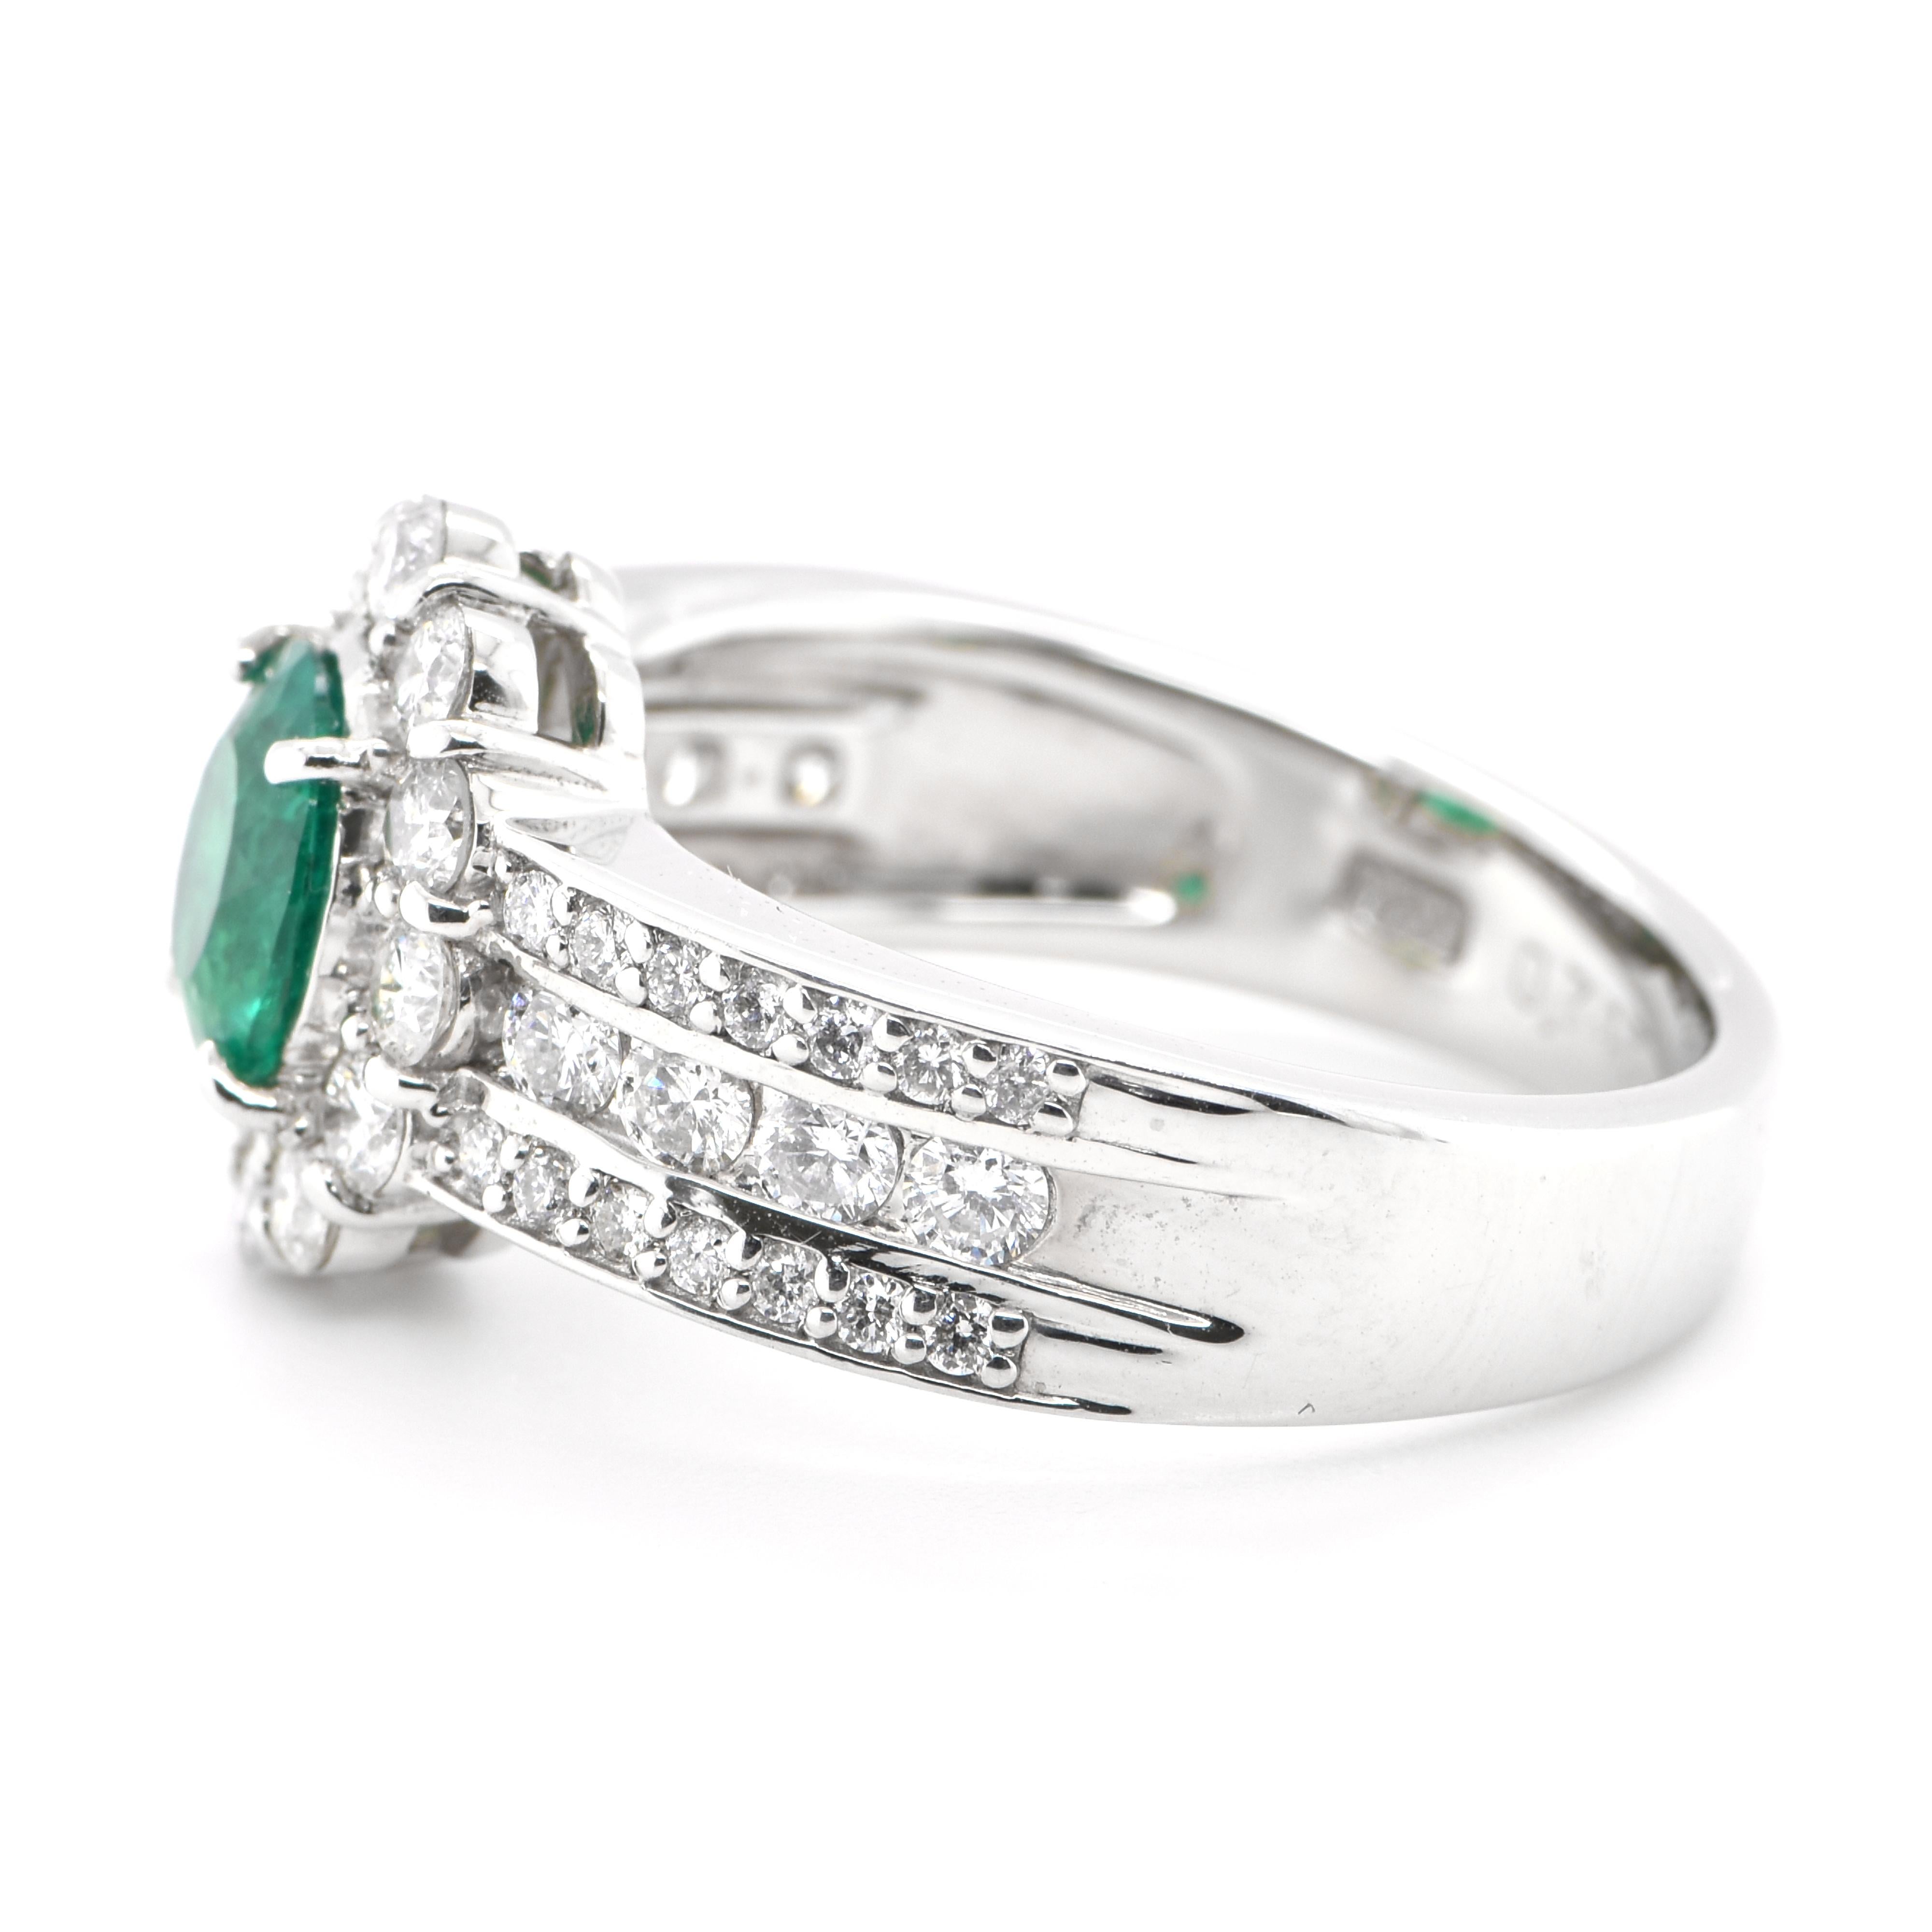 Oval Cut 0.74 Carat Natural Untreated 'No-Oil' Emerald and Diamond Ring Set in Platinum